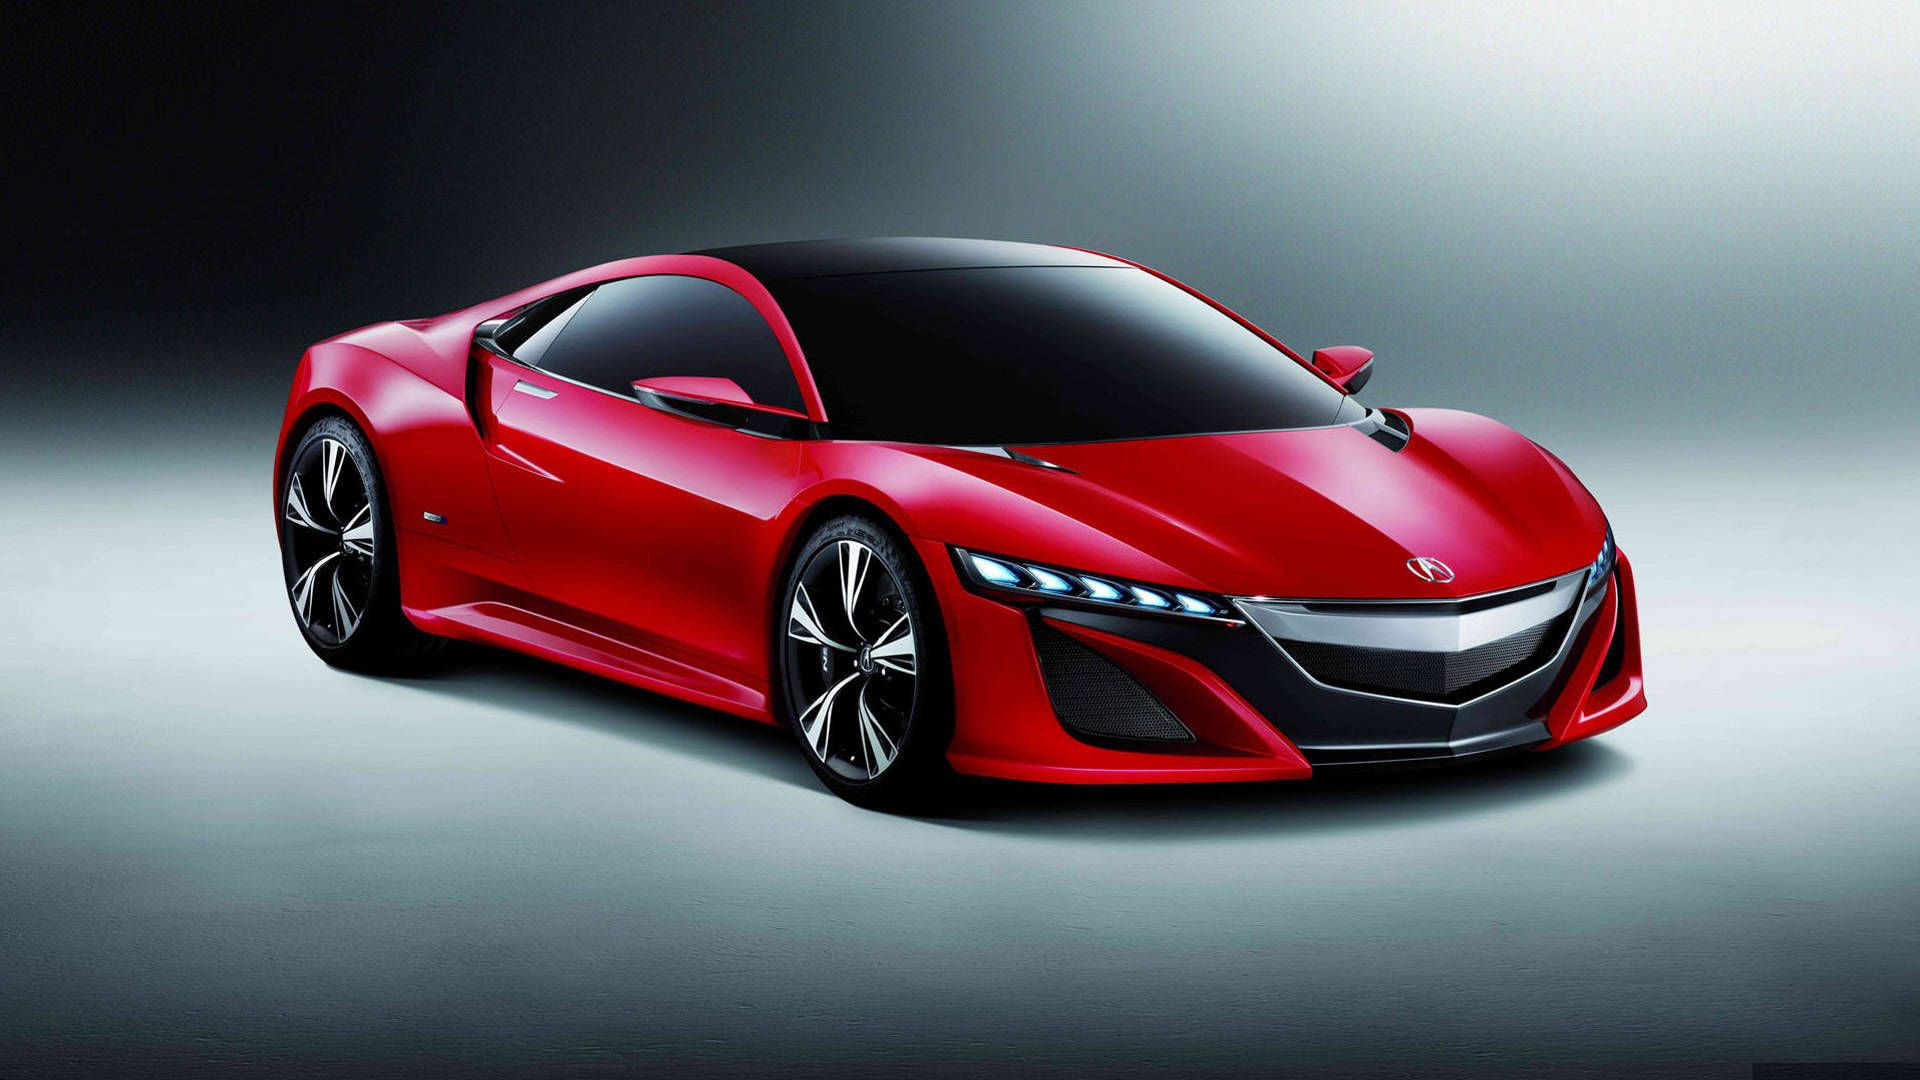 Free download NSX concept car red modern car HD wallpaper Background wallpaper [1920x1080] for your Desktop, Mobile & Tablet. Explore Red Car Wallpaper. Black and Red Car Wallpaper